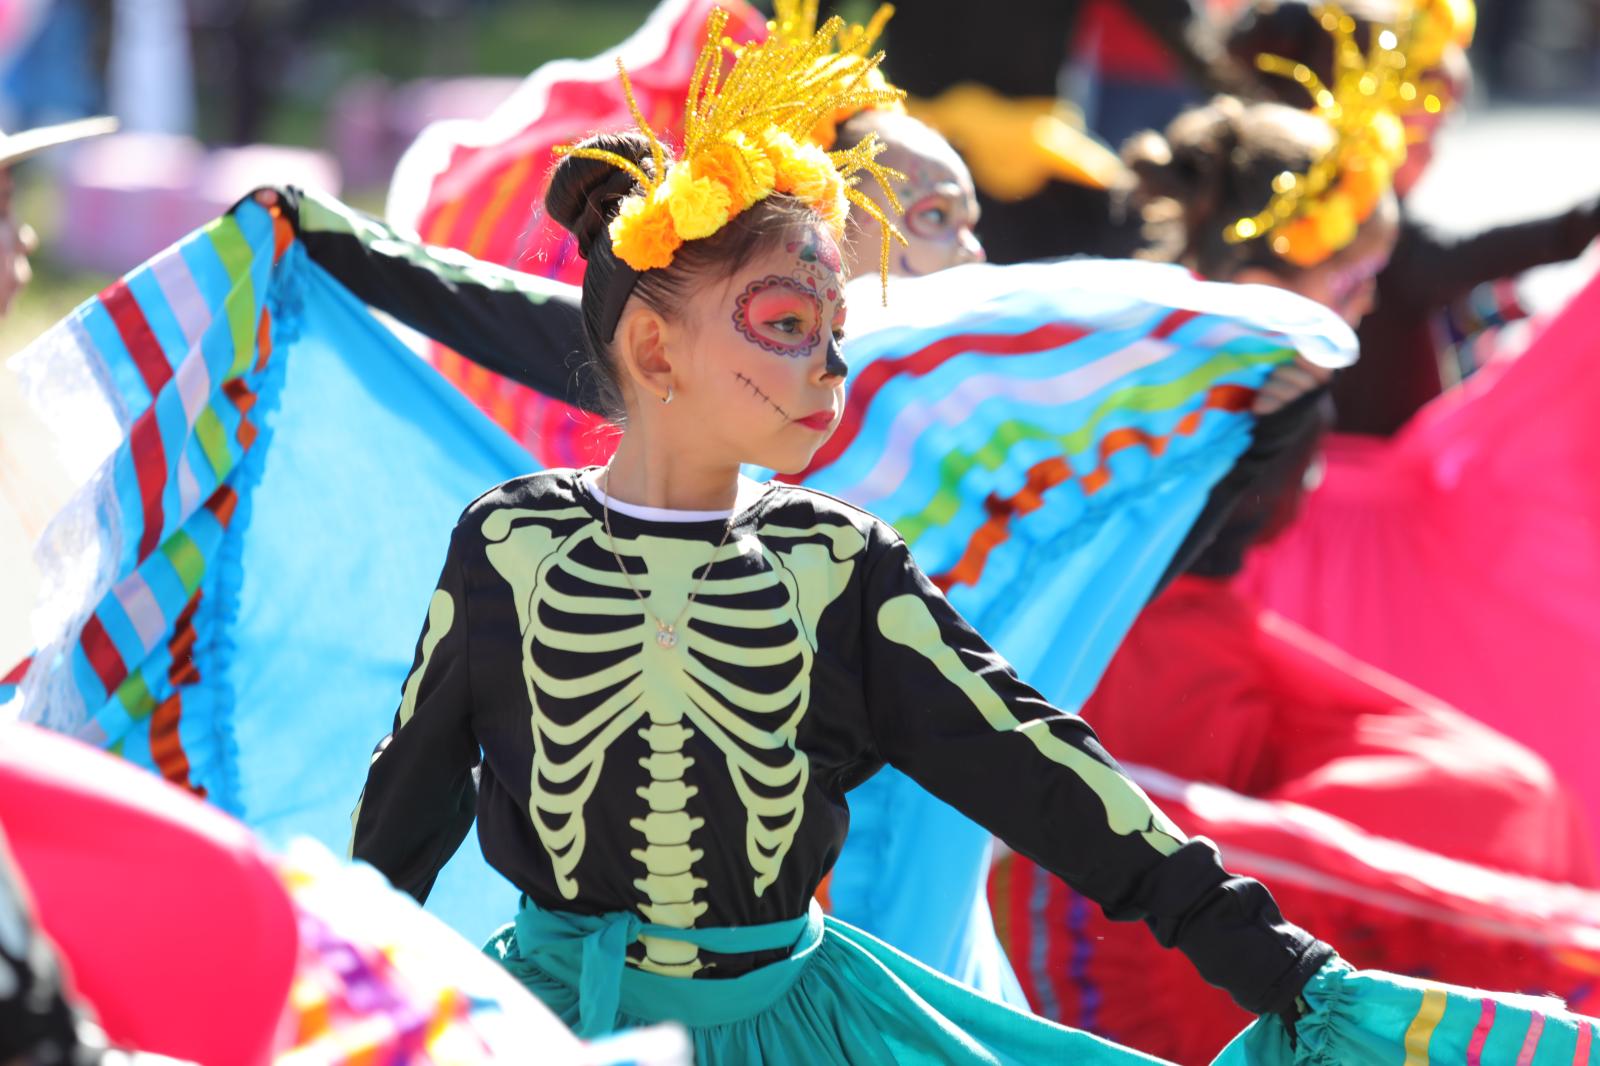 Upside Down Halloween Parade in Washington Park, Chicago ,  | Buy this image